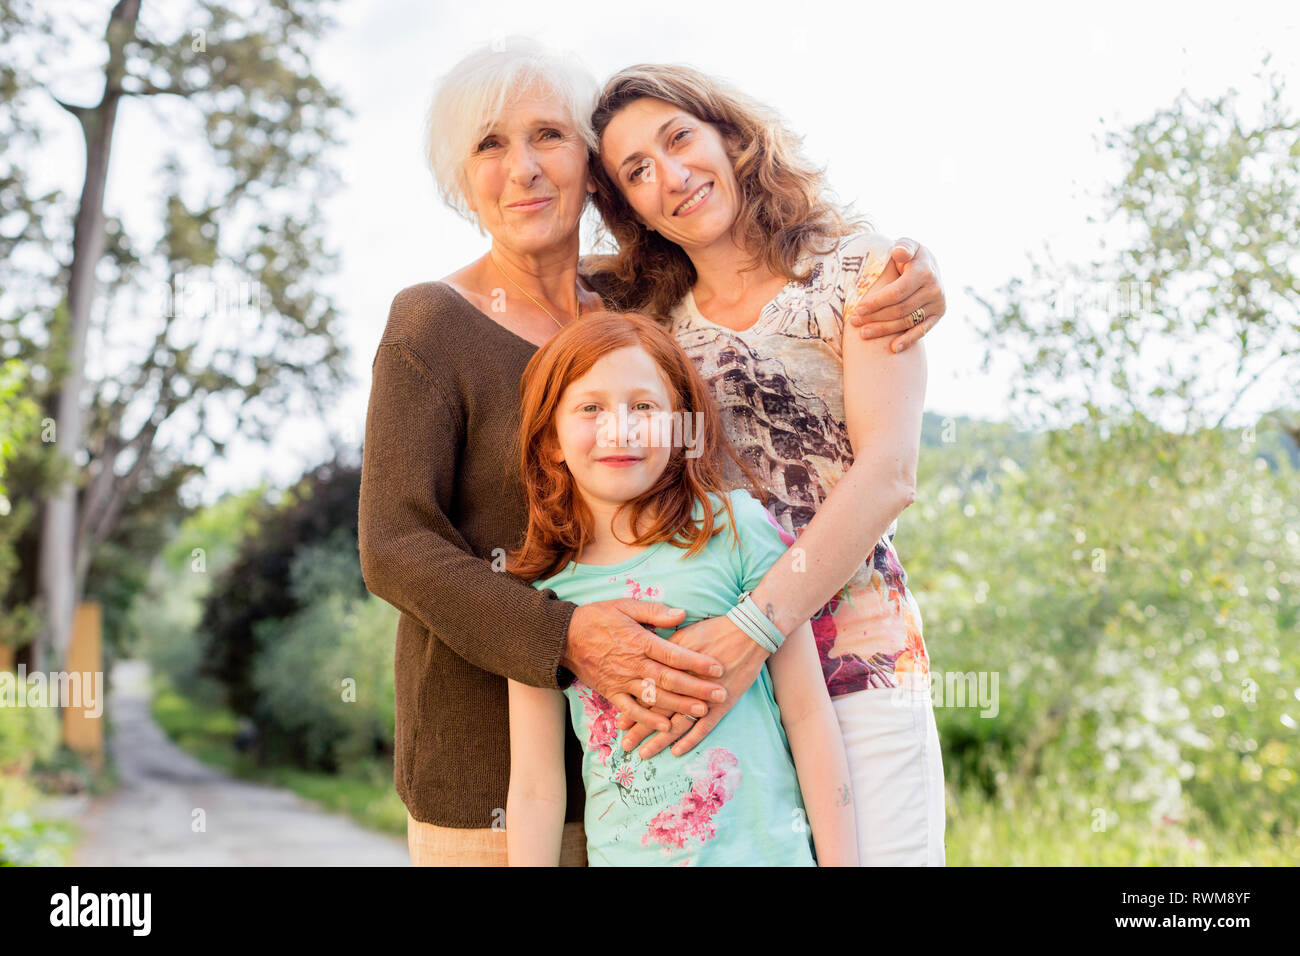 Girl on rural road with mother and grandmother, portrait Stock Photo